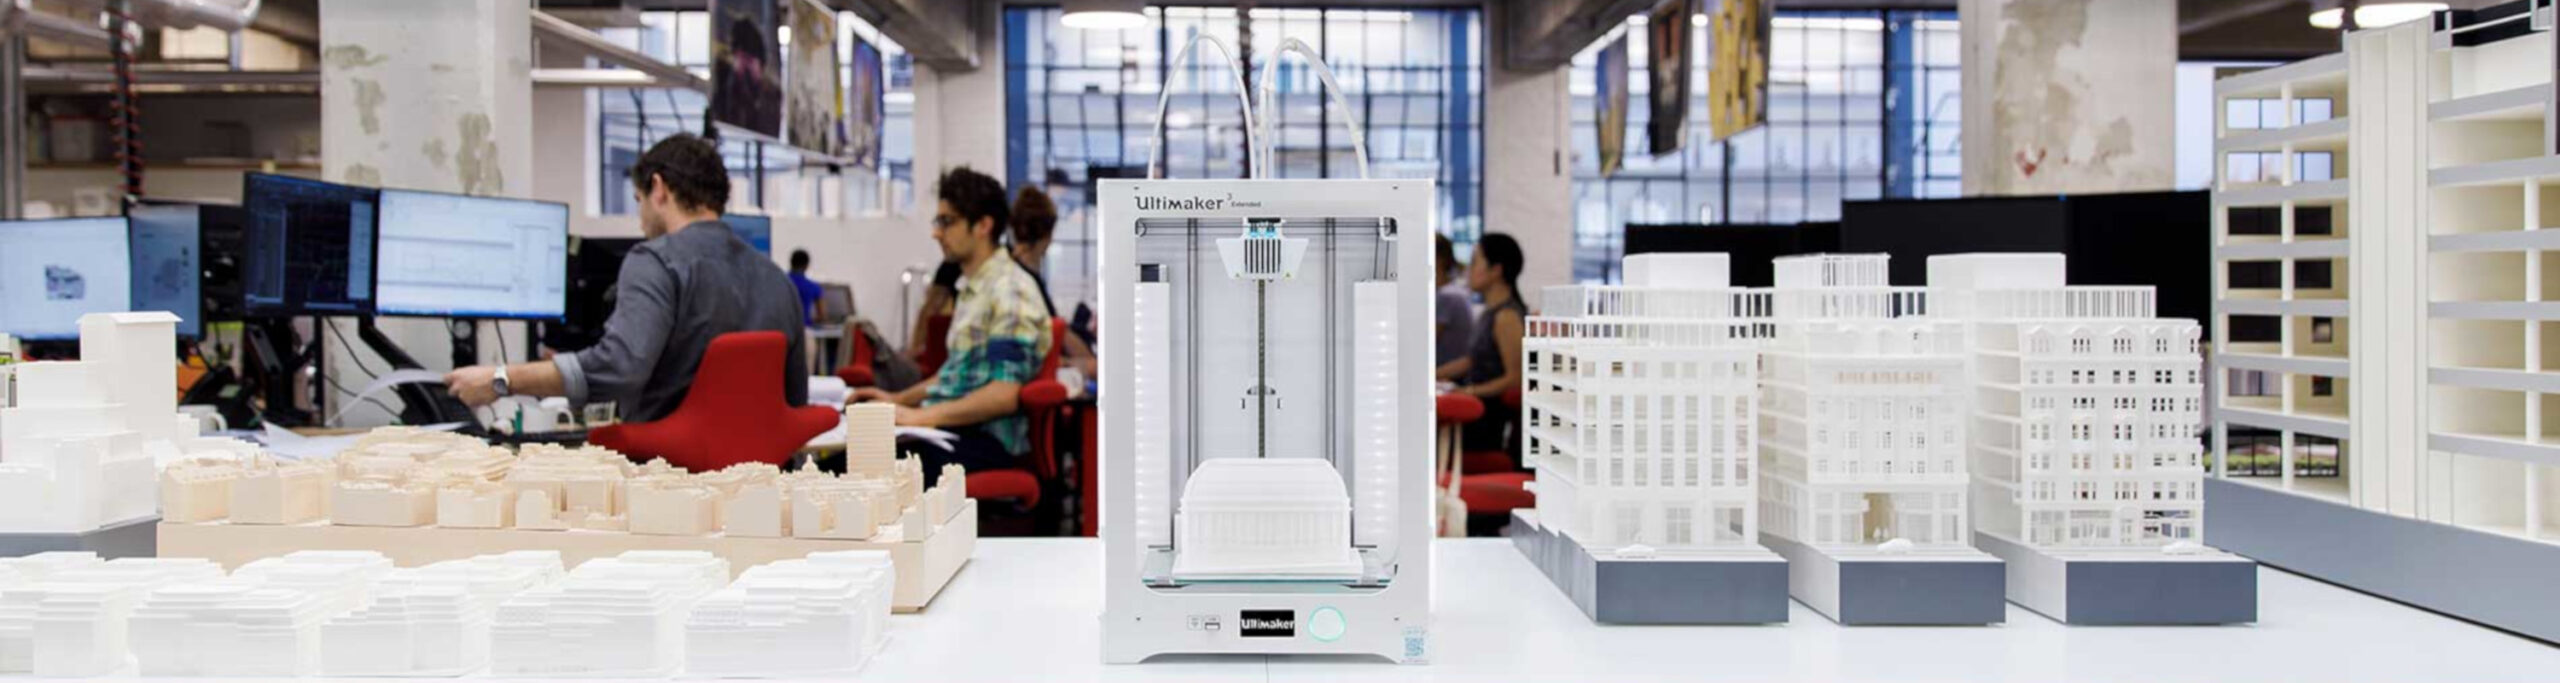 Ultimaker at Make Architects 2